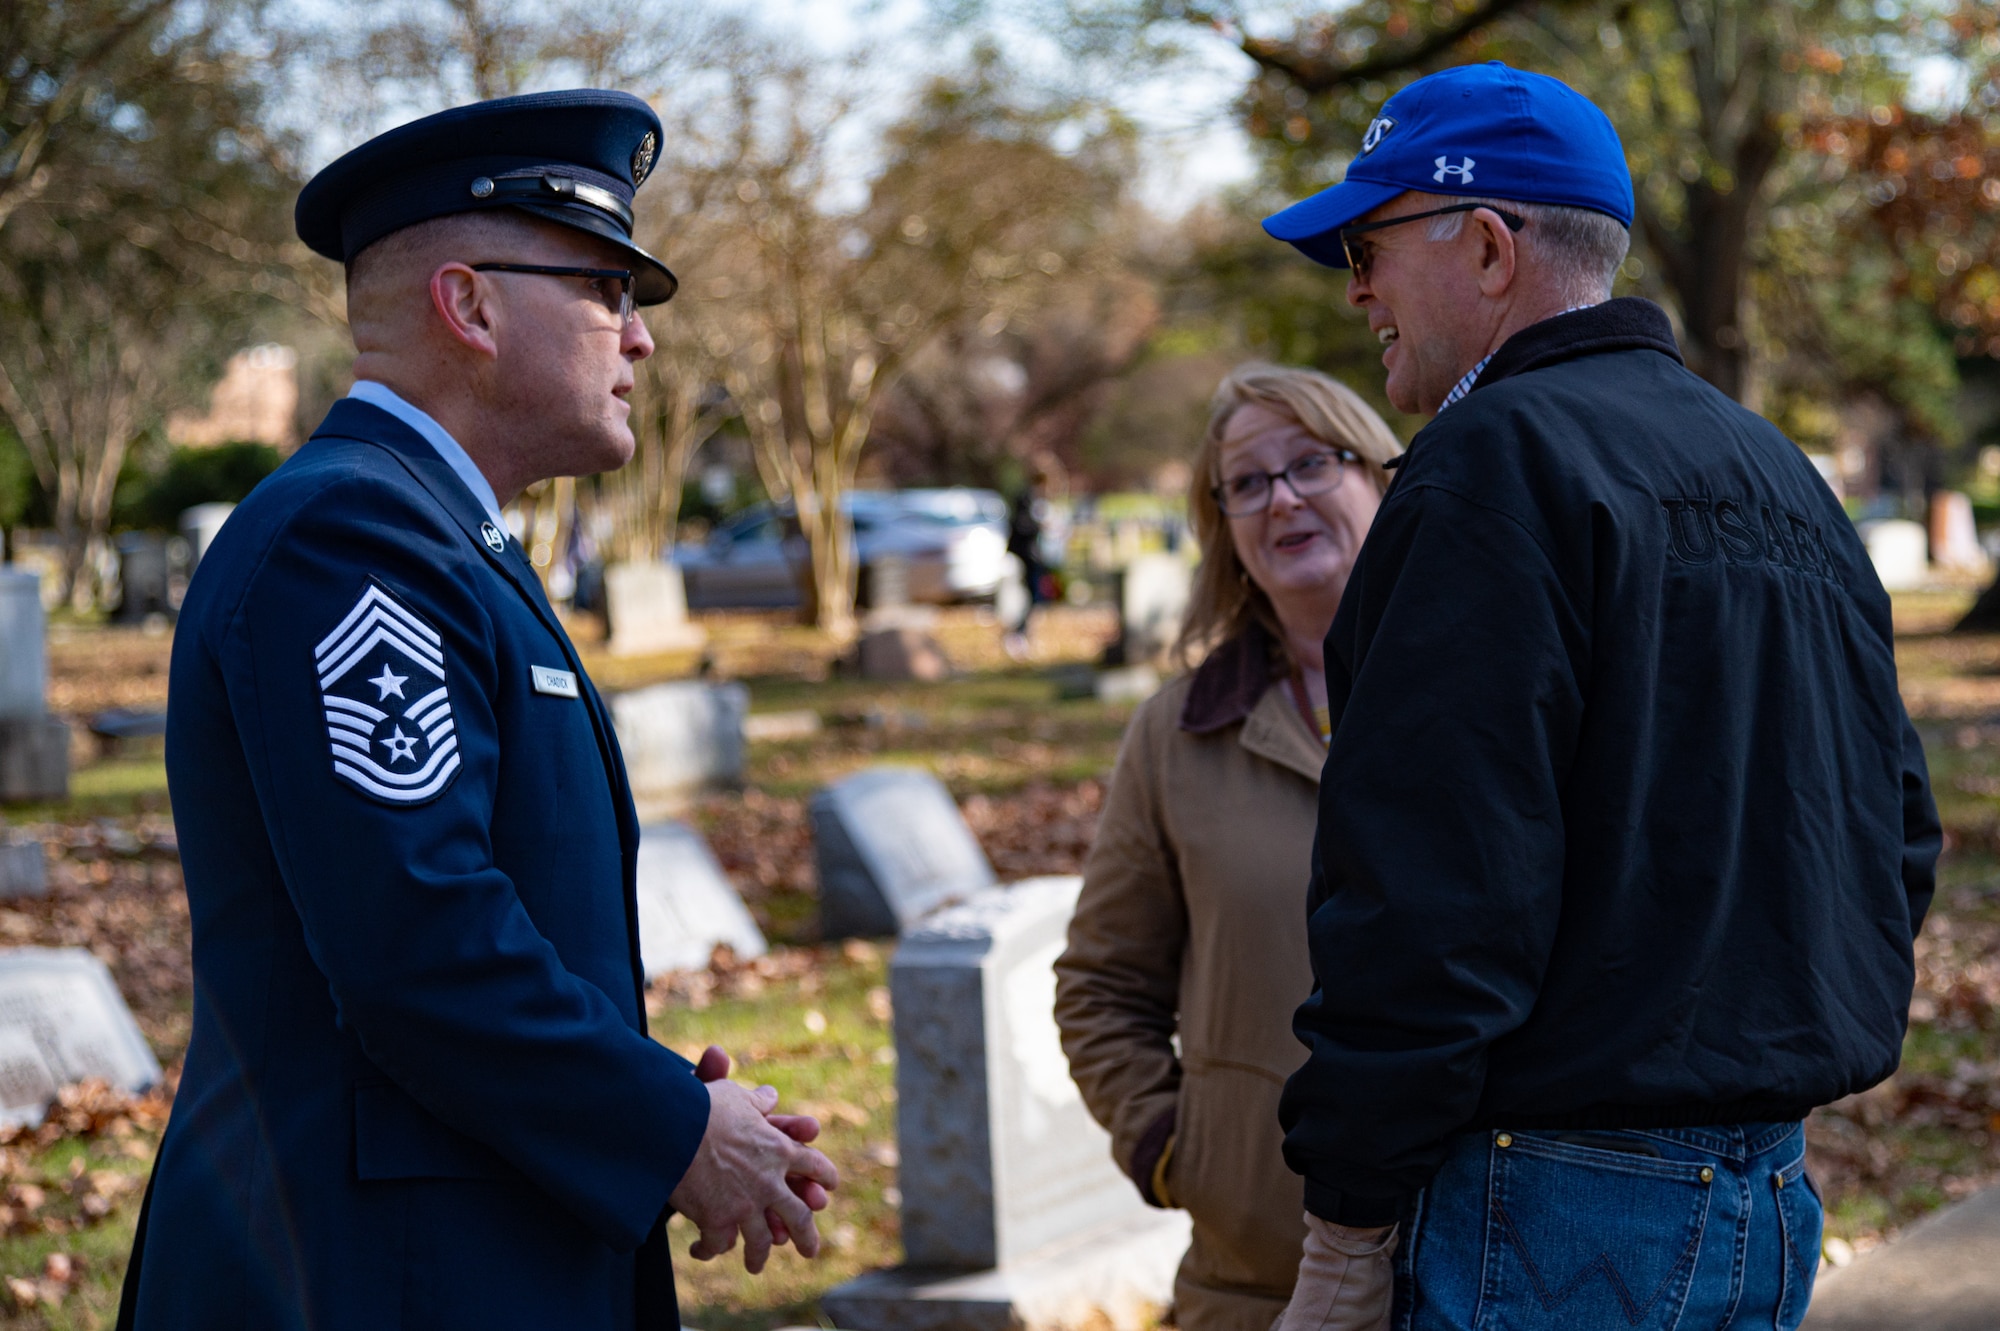 Chief Master Sgt. Travis Chadick, 2nd Bomb Wing command chief, speaks with local community members following a National Wreaths Across America ceremony at Bossier City, Louisiana, Dec. 19, 2021.